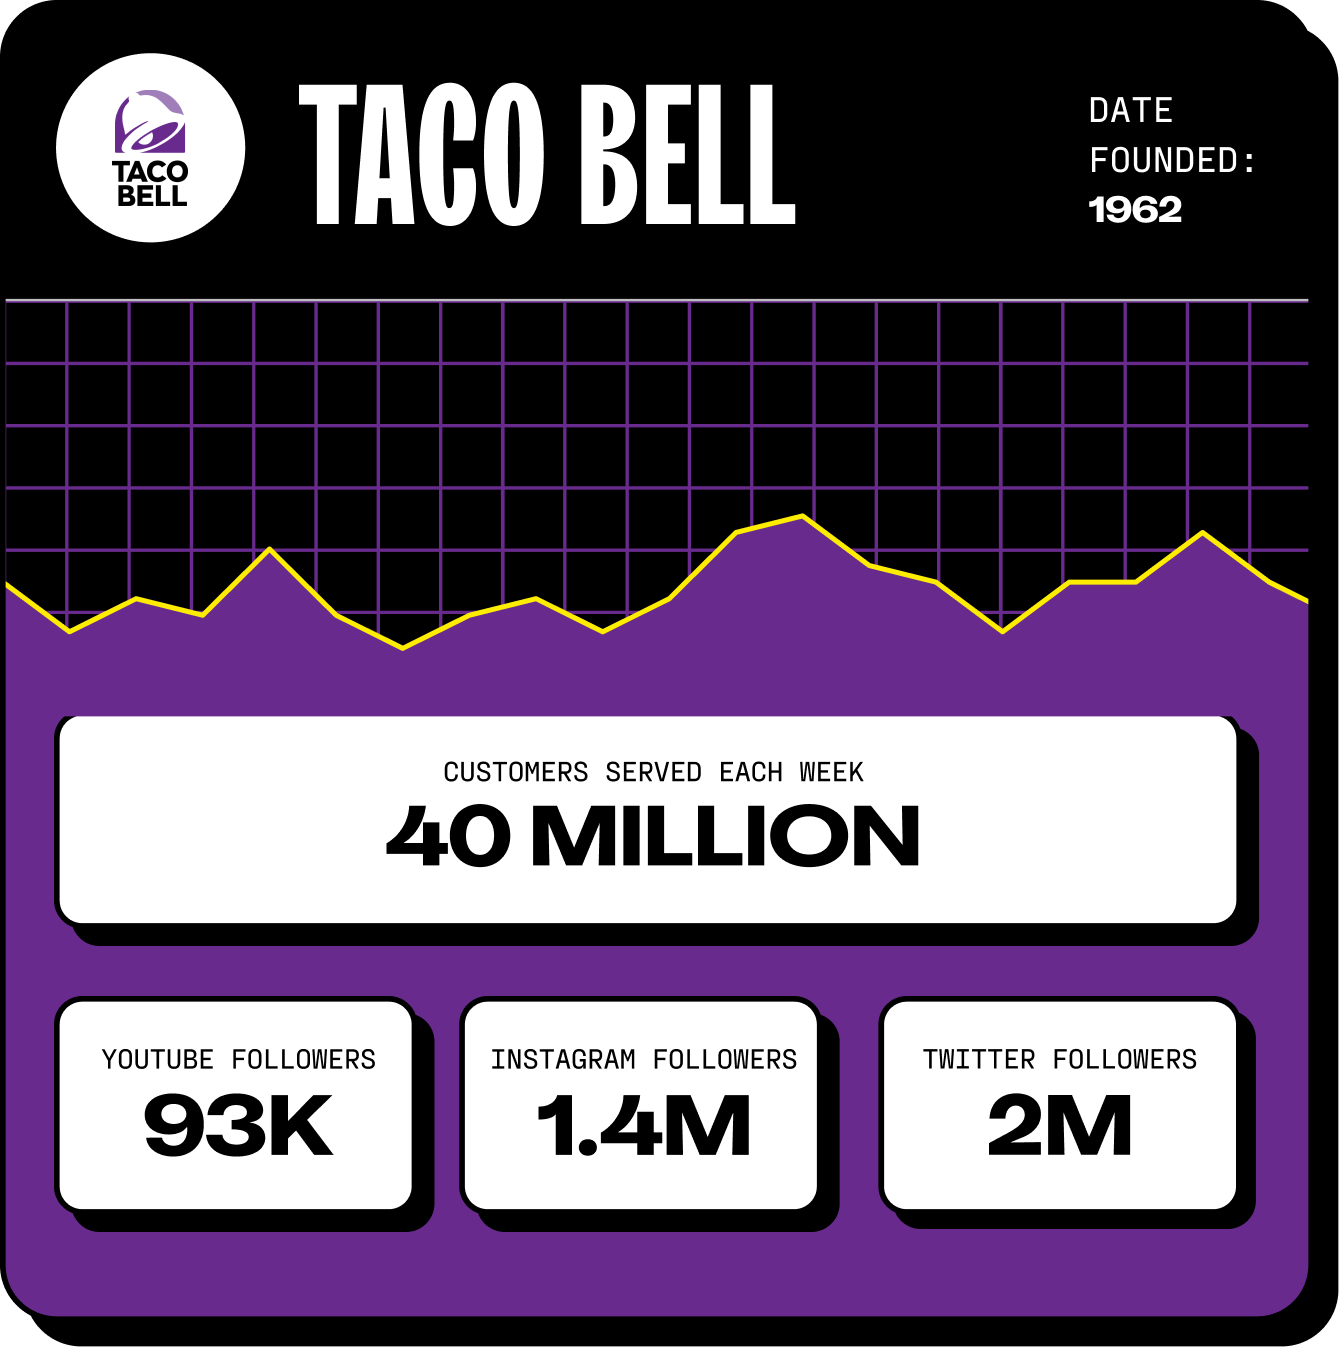 Taco Bell was founded in 1962 and serves more than 40 million customers each week in the U.S. 